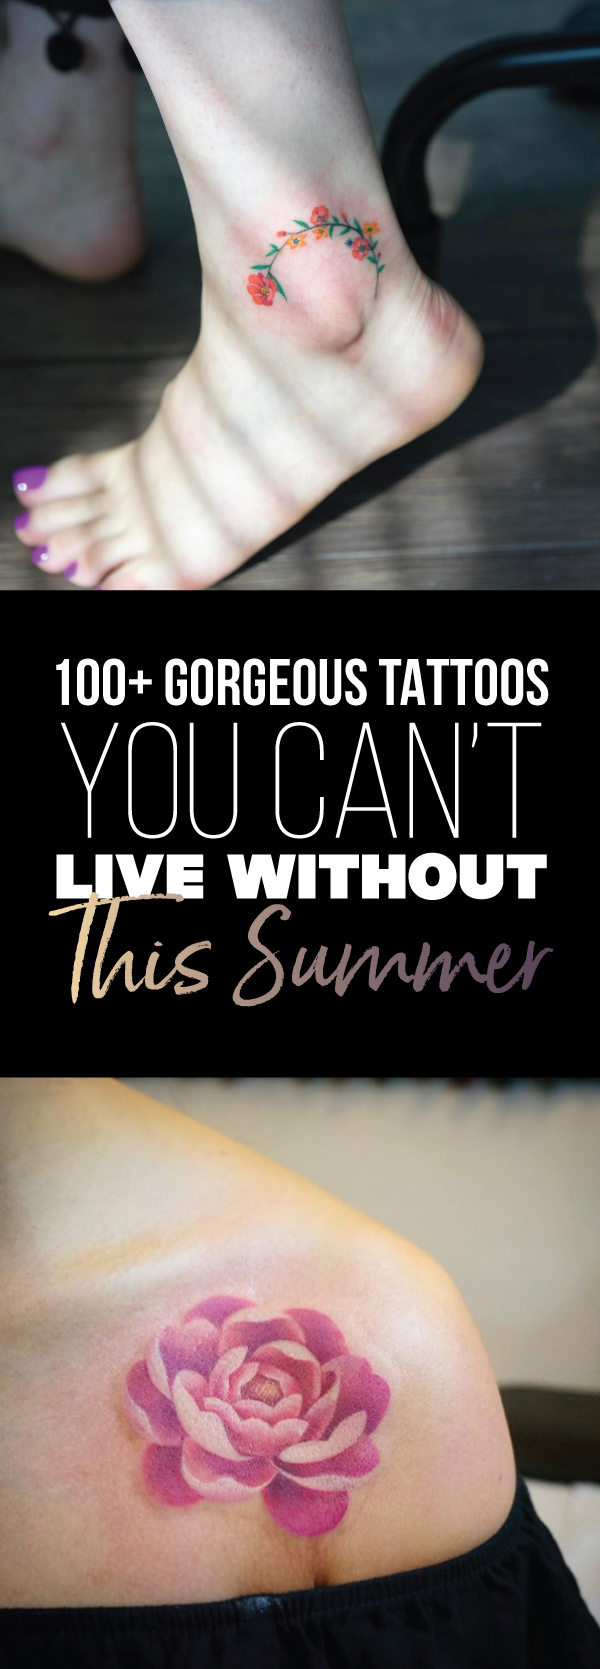 100+ Gorgeous Tattoos You Can't Live Without This Summer